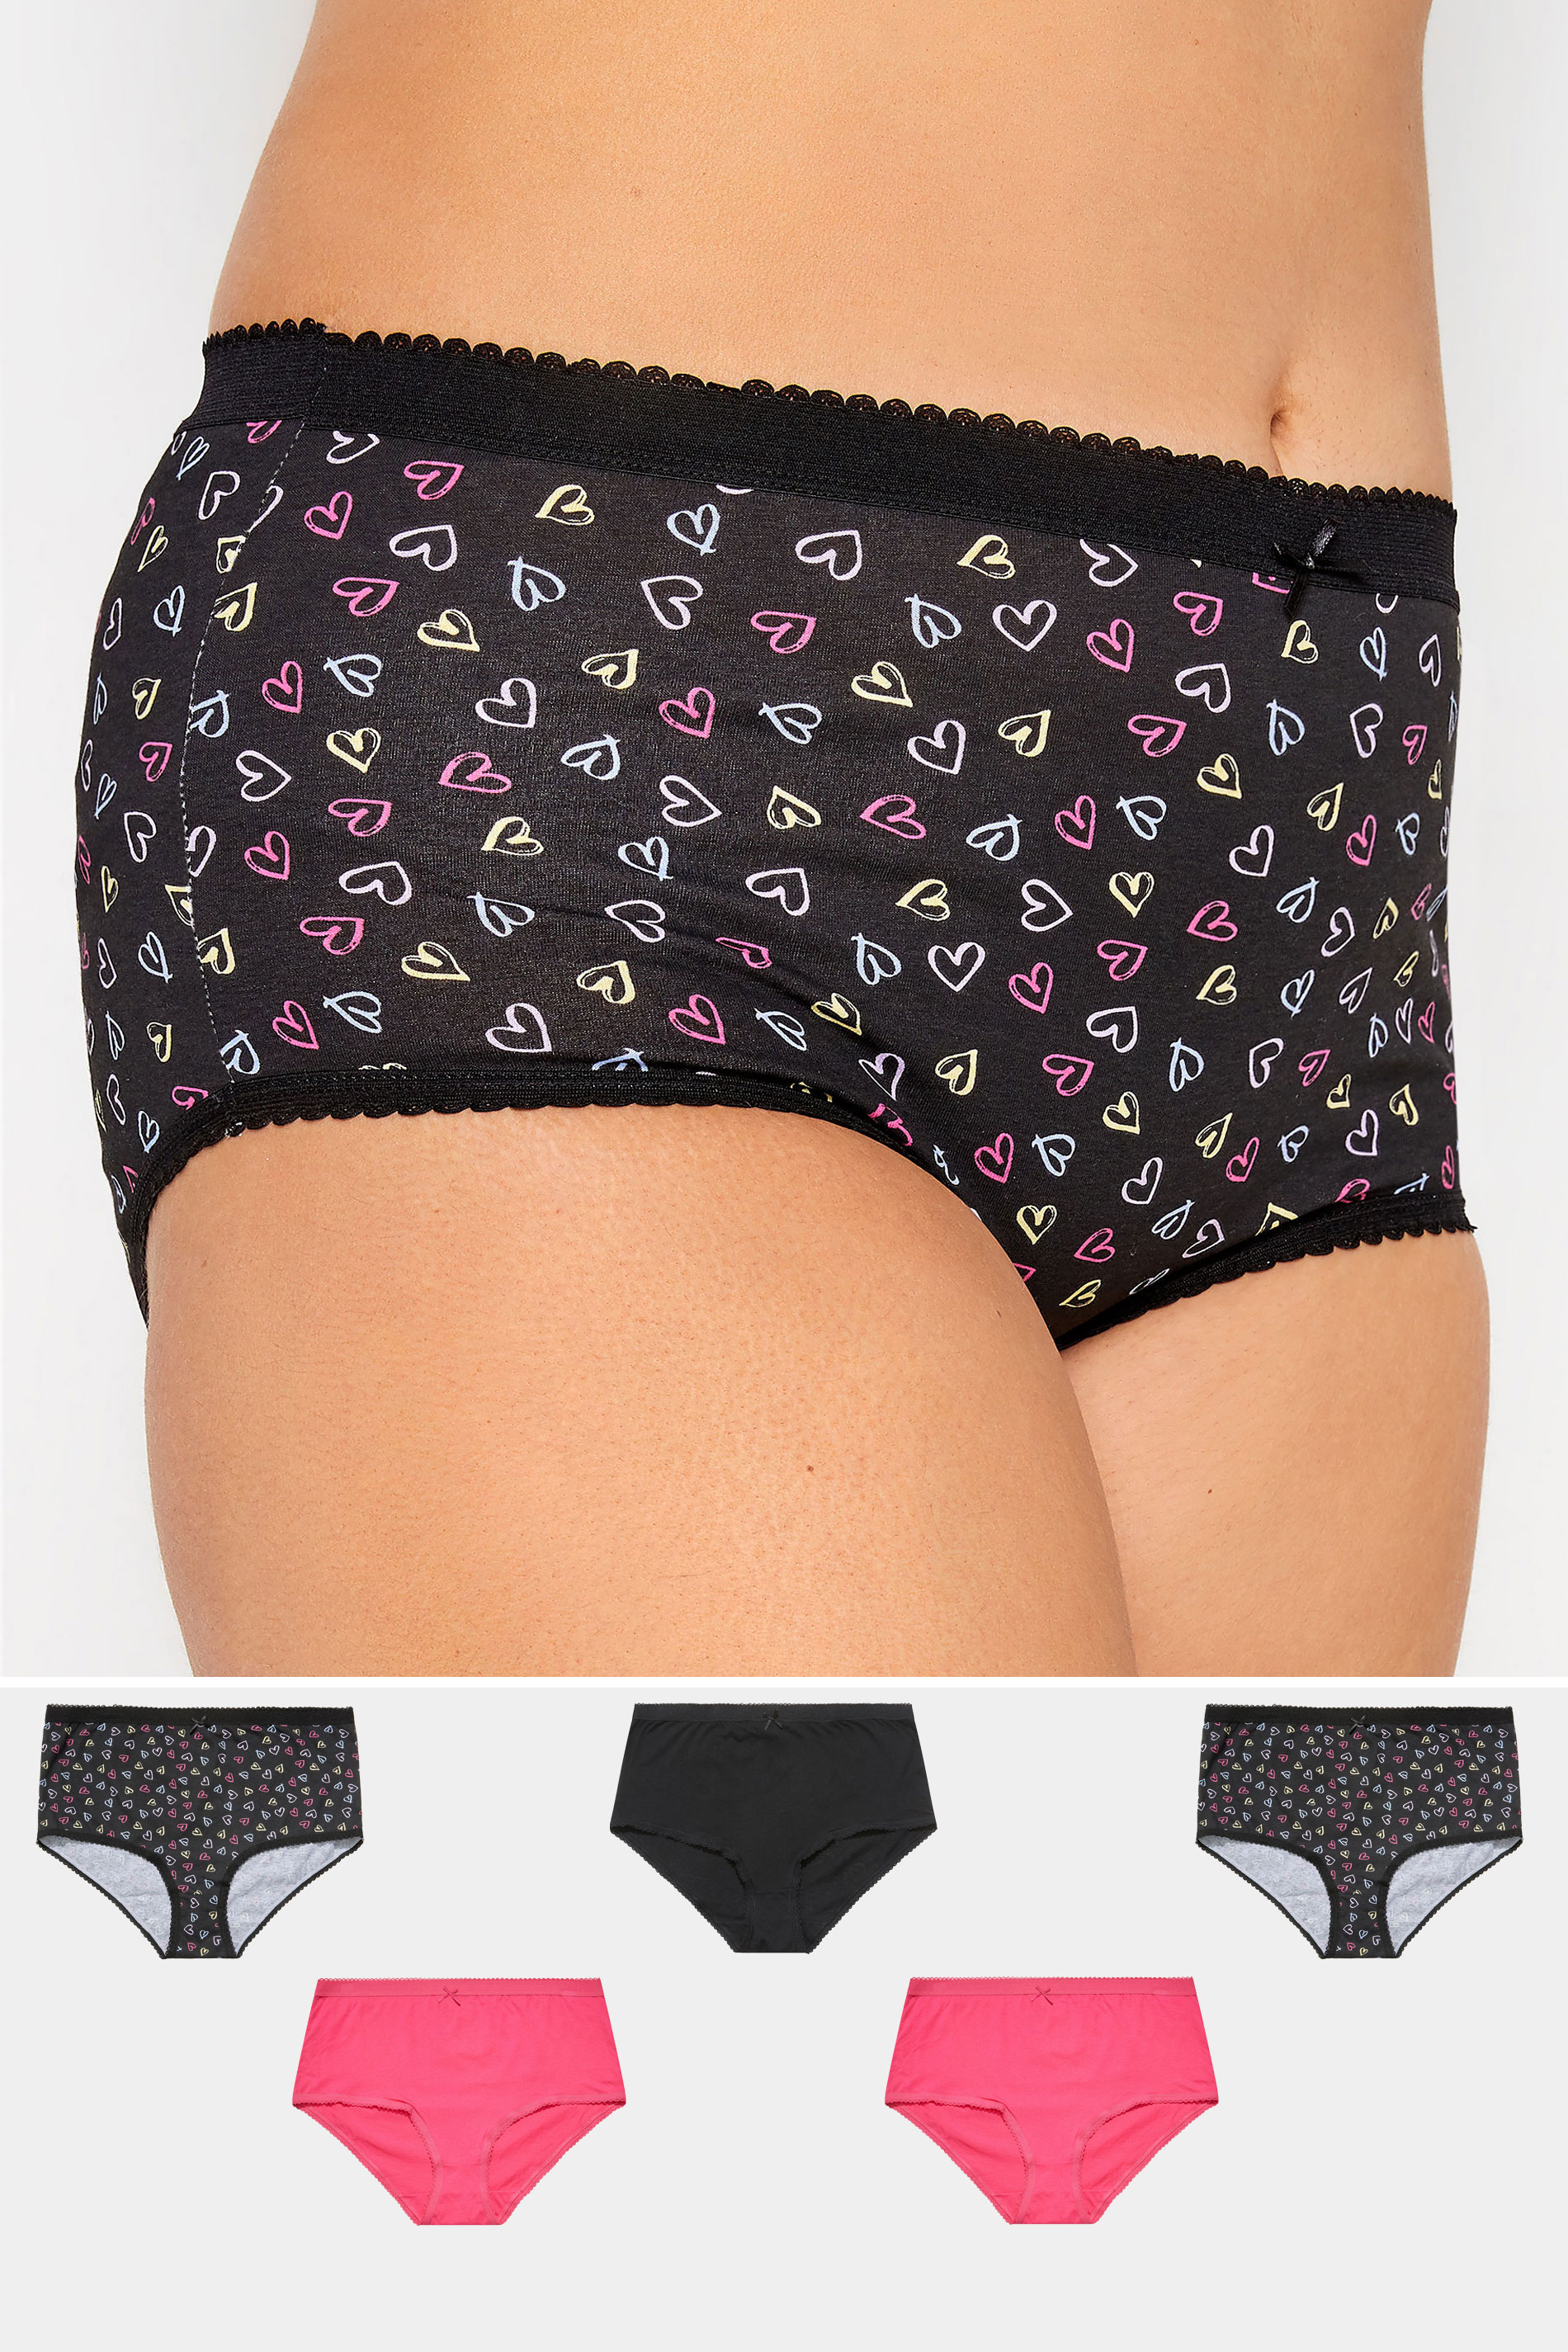 5 PACK Curve Black & Pink Heart Print High Waisted Full Briefs 1